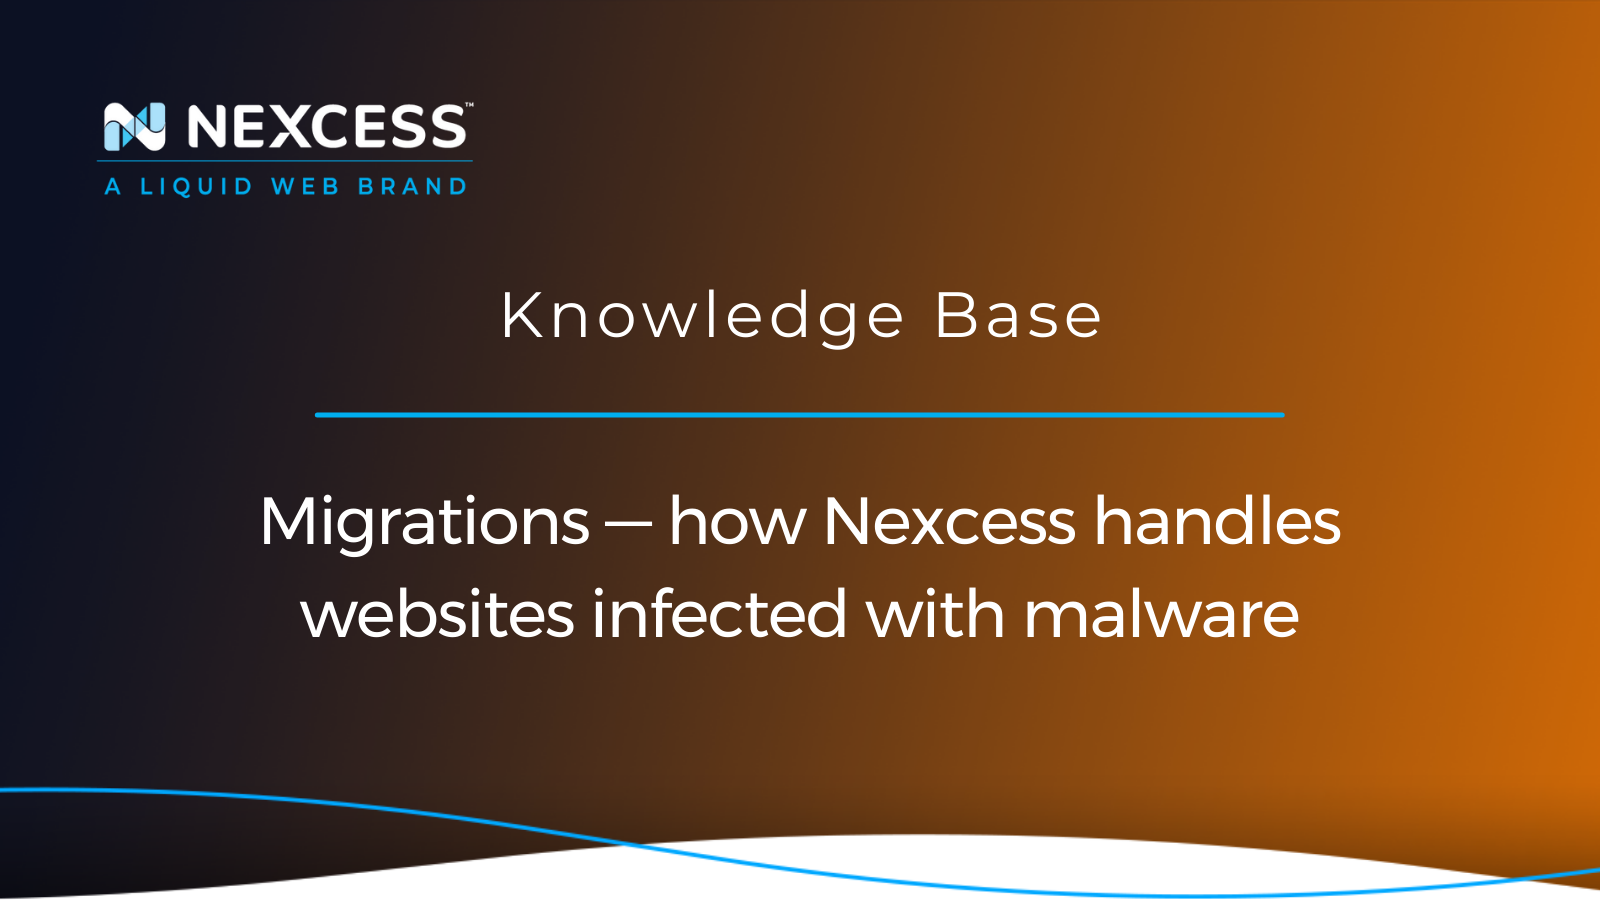 Migrations — how Nexcess handles websites infected with malware